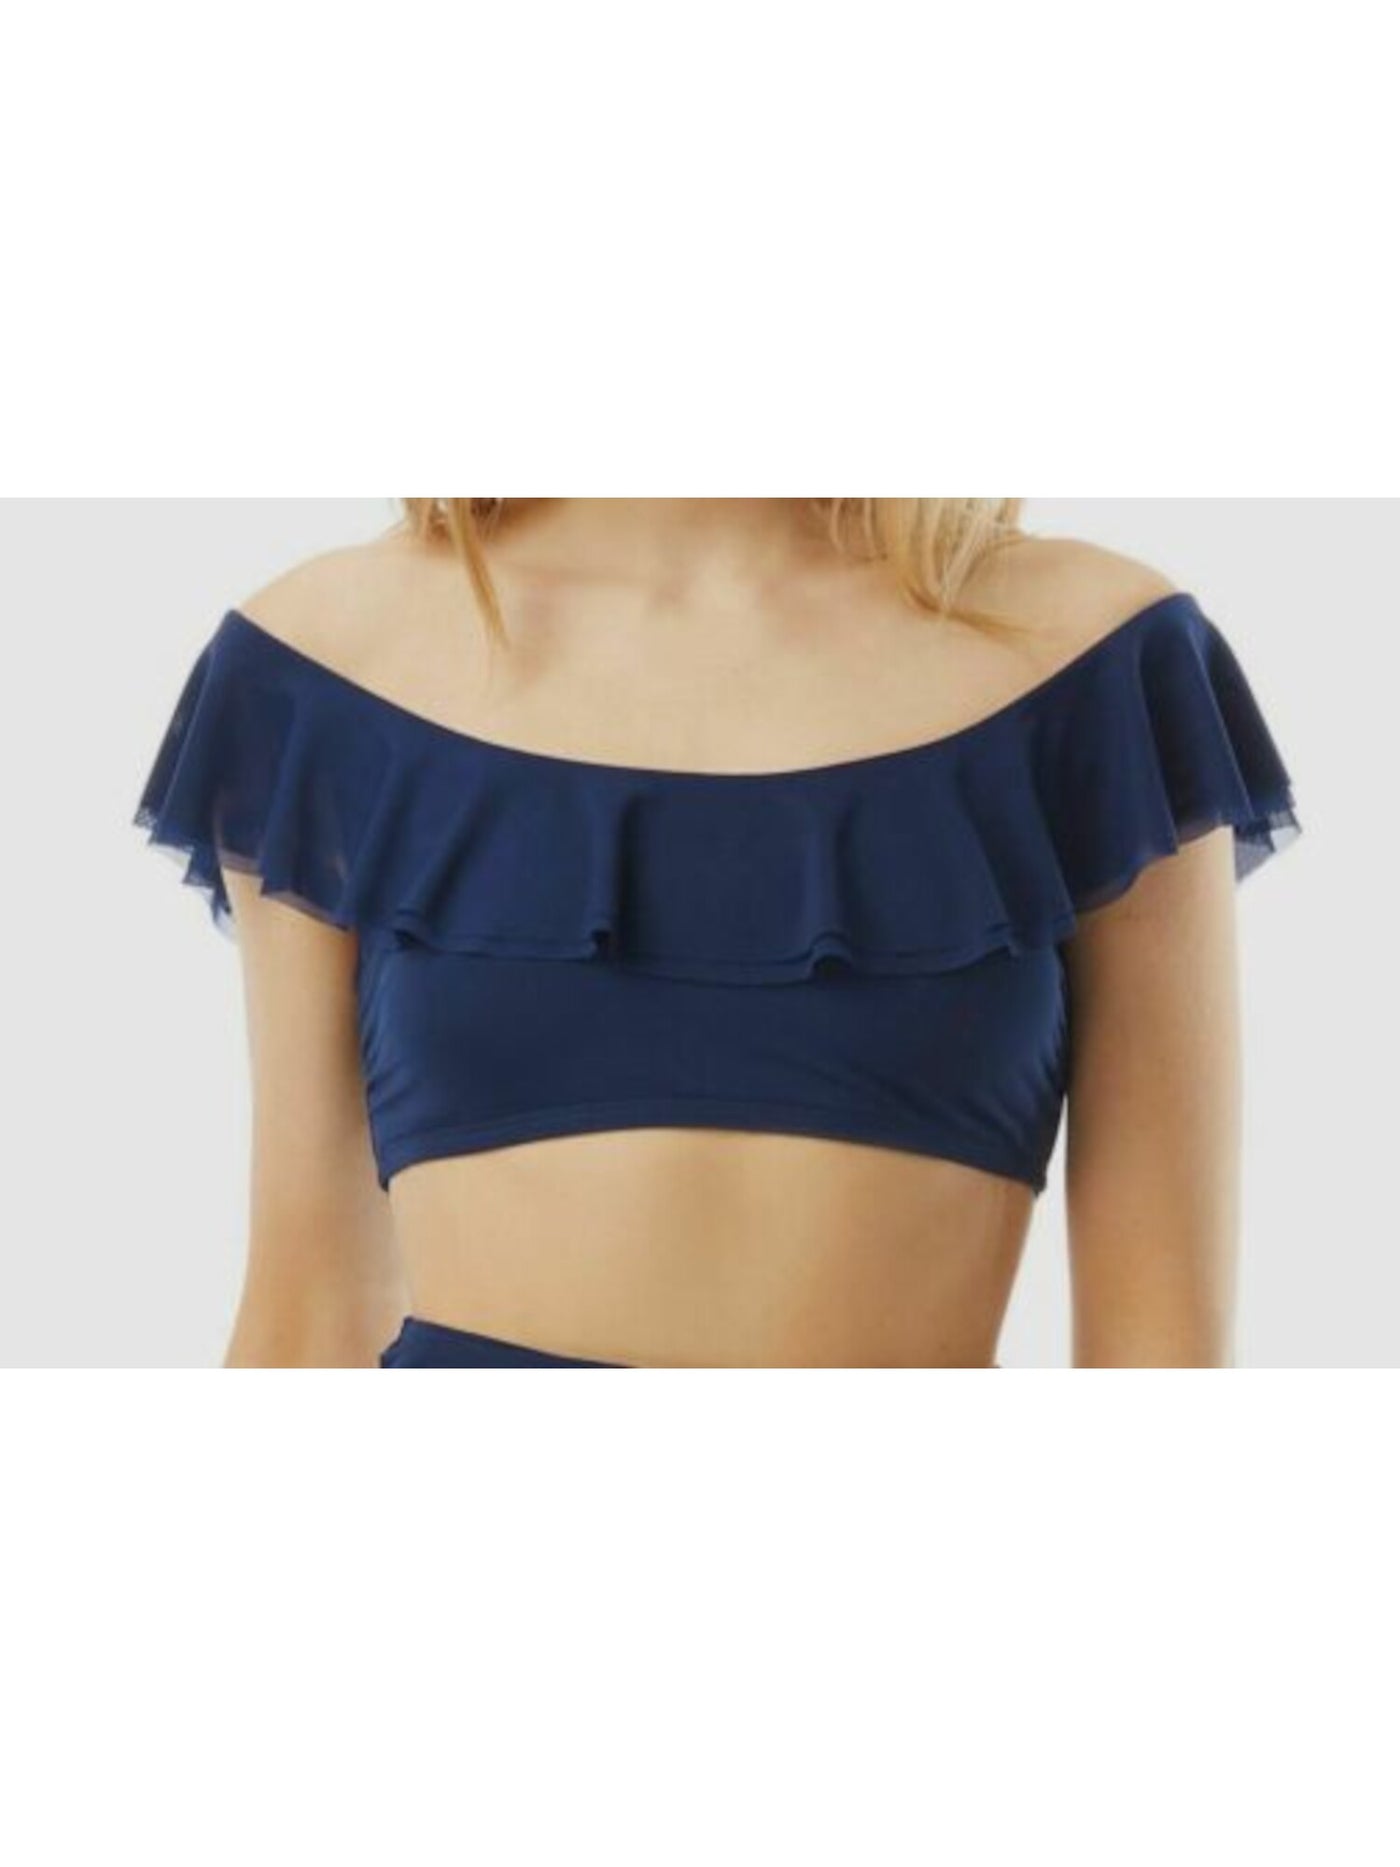 CARMEN MARC VALVO Women's Navy Stretch Removable Cups Lined Convertible Ruffled Marche De Solids Off The Shoulder Swimsuit Top L